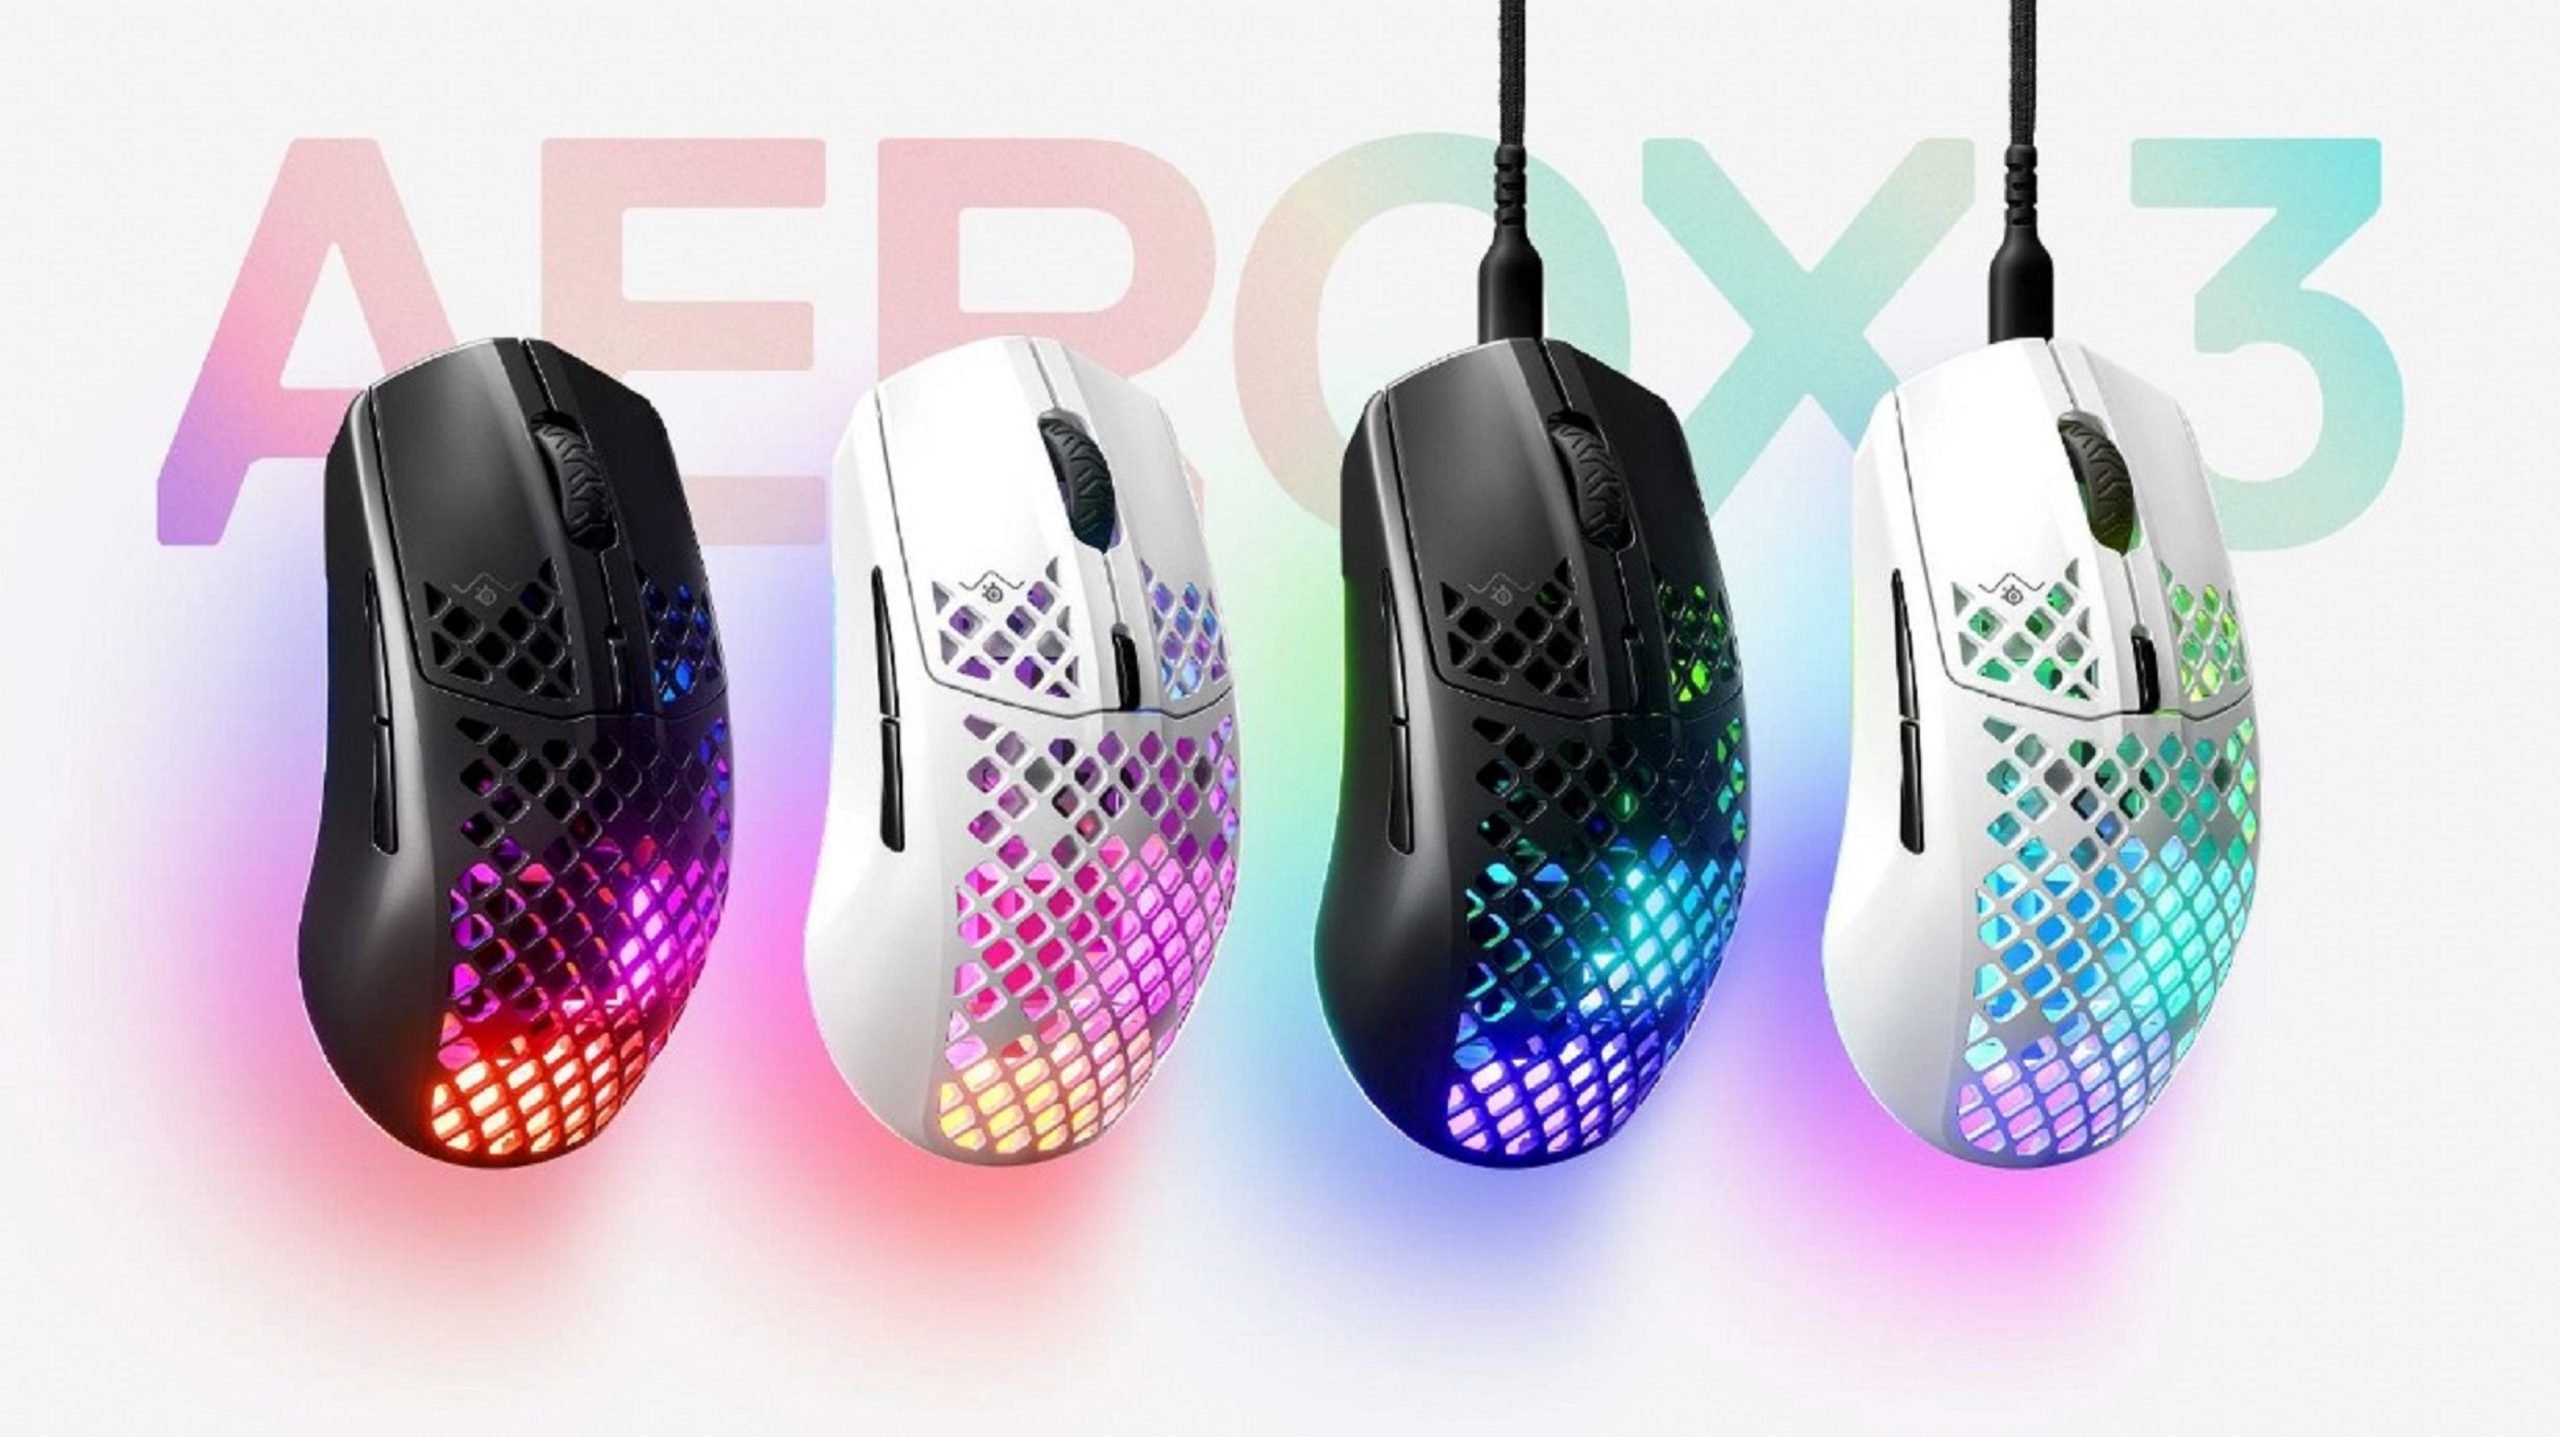 Aerox 3 2022 edition mouse